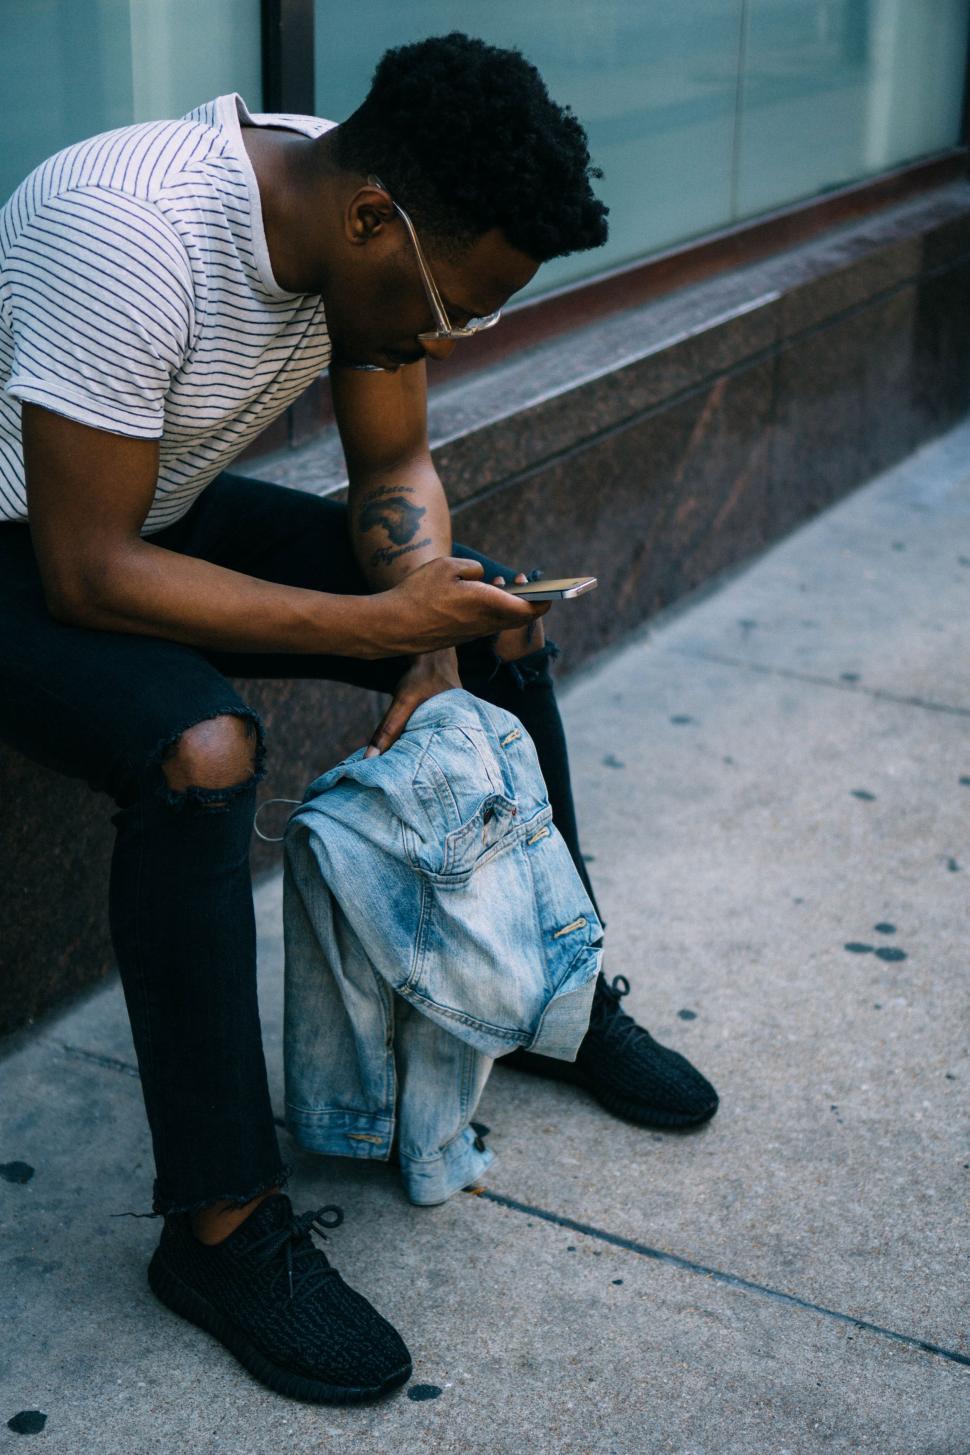 Free Image of Man Sitting on Curb Looking at Cell Phone 